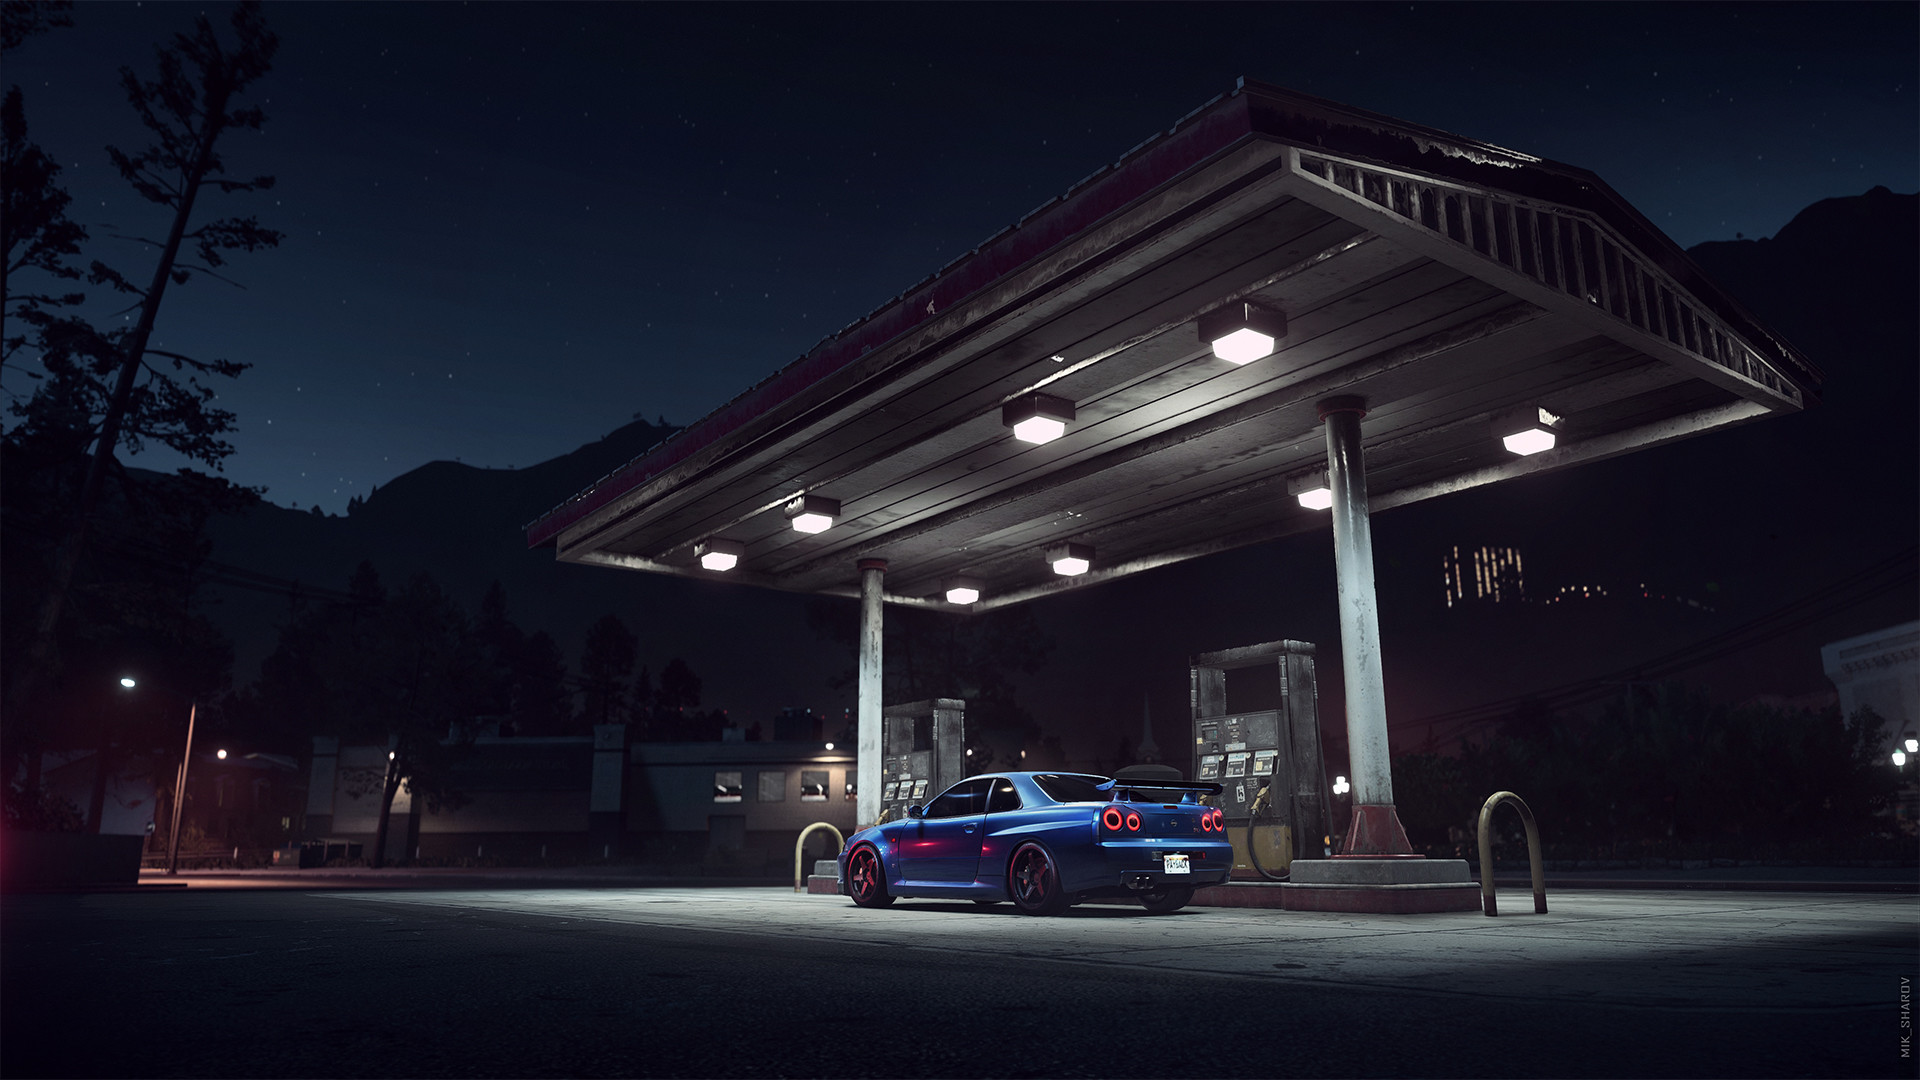 Nightscape Nissan Nissan Skyline R34 Night Gas Station Need For Speed Video Game Art Screen Shot Mou 1920x1080